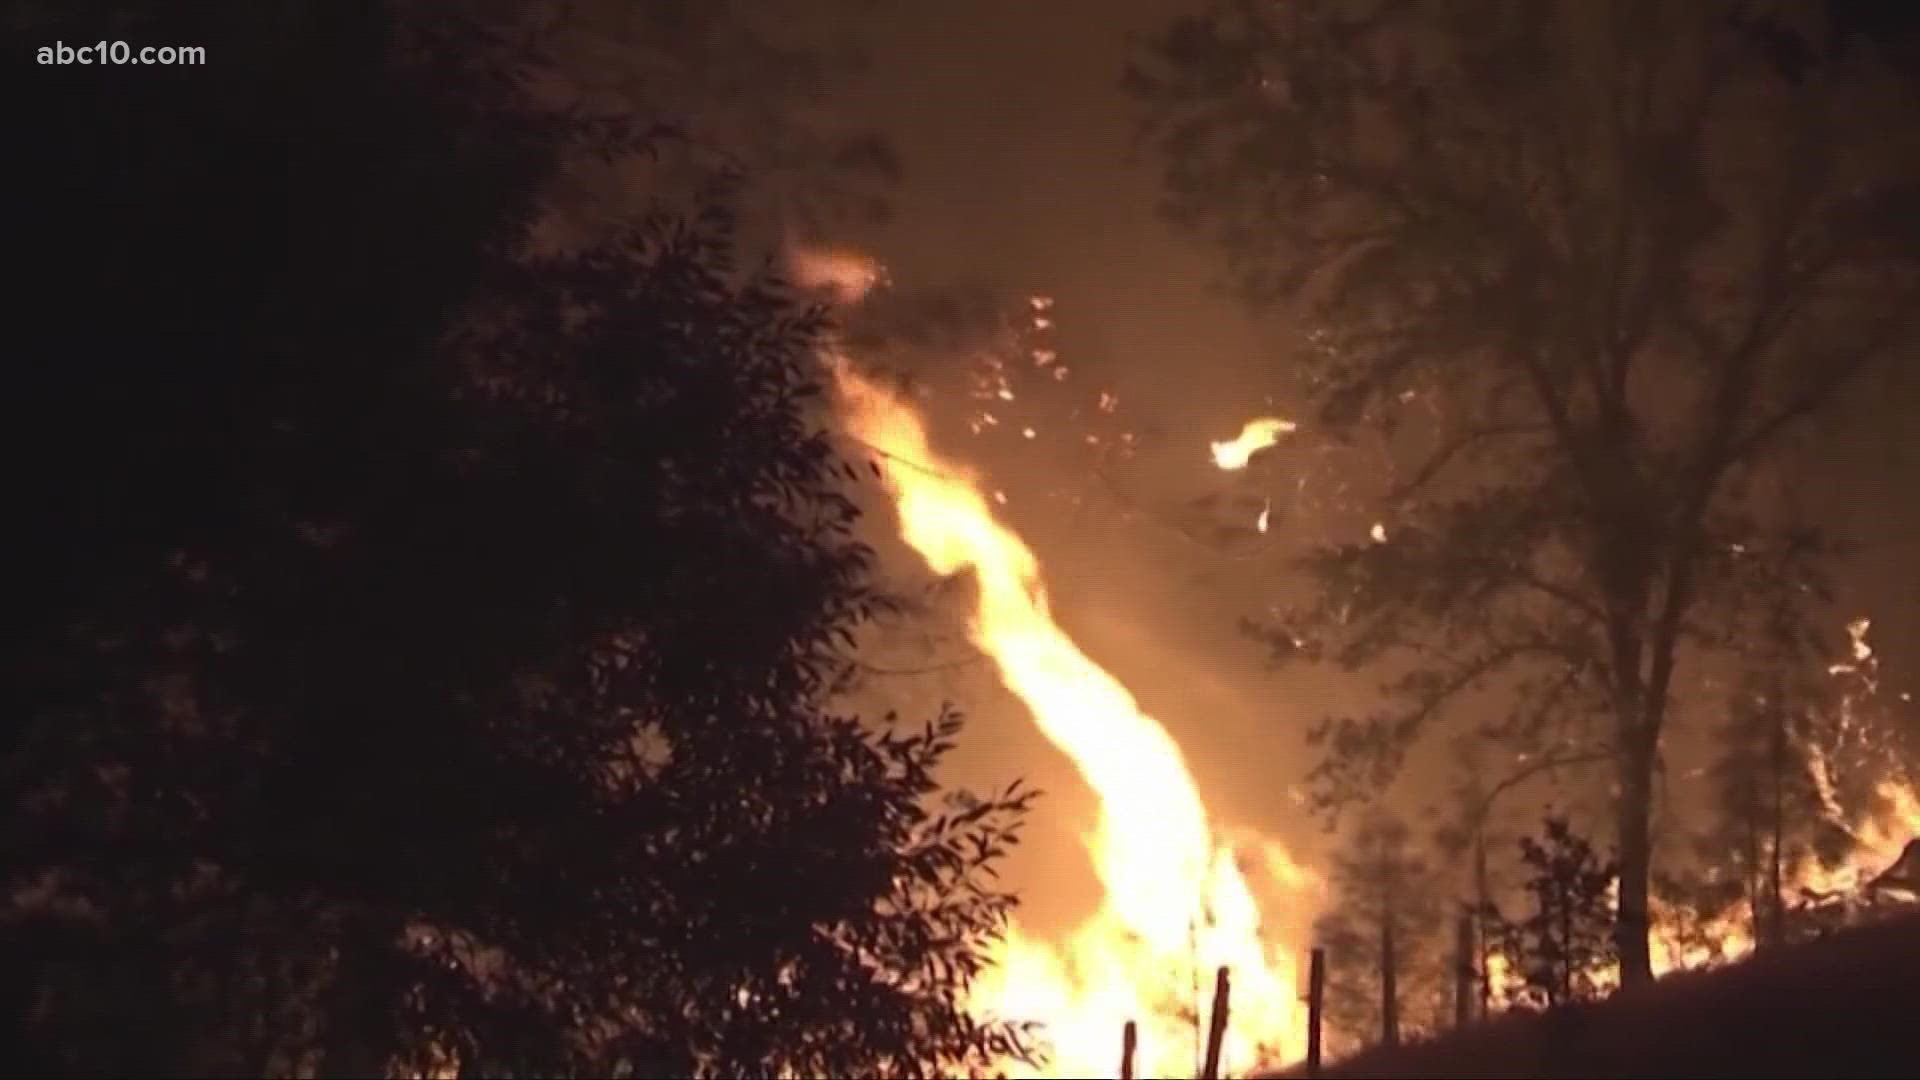 The judge overseeing PG&E's probation case says the company has two more violations under its federal record after being charged for the Zogg and Kincade fires.